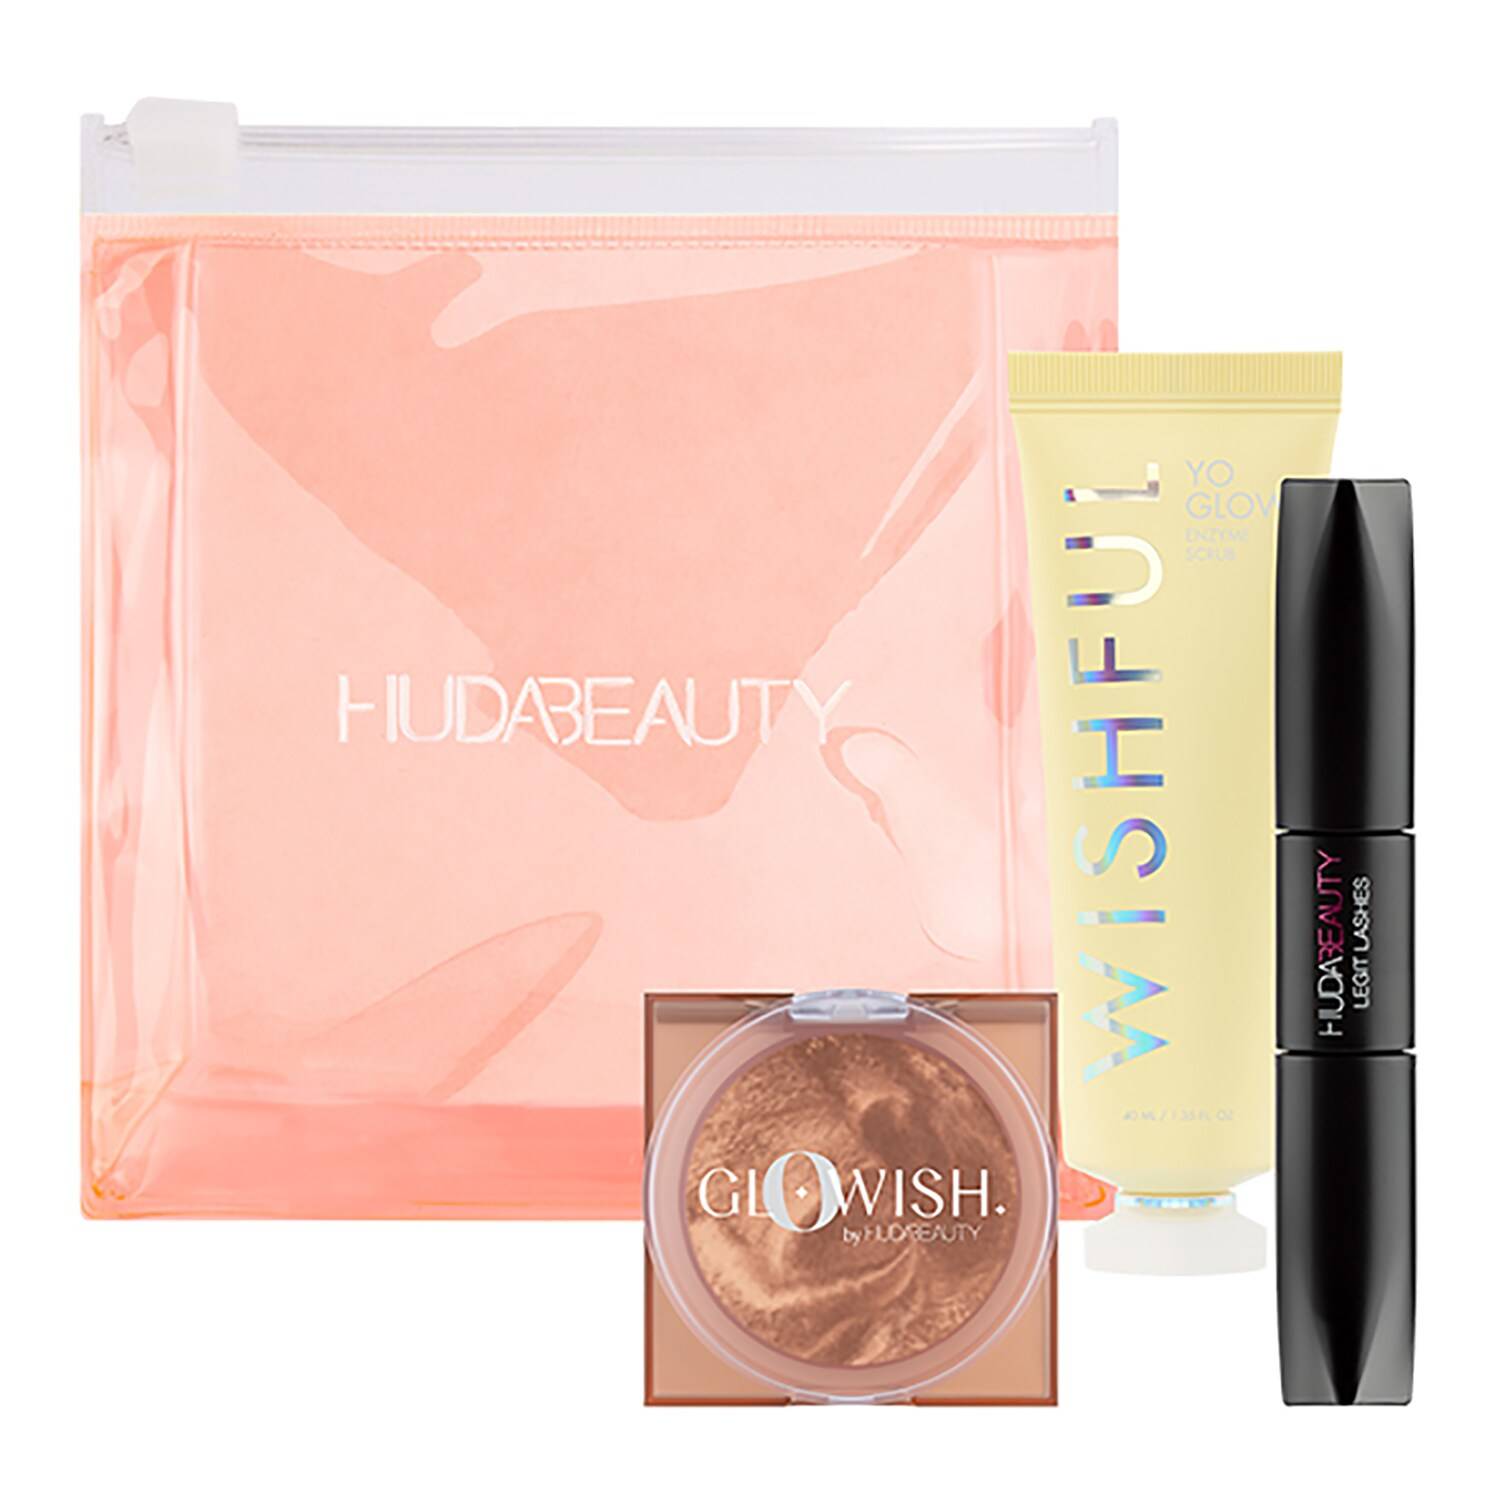 Huda Beauty On The Go Must Haves Set - Sephora Exclusive Set